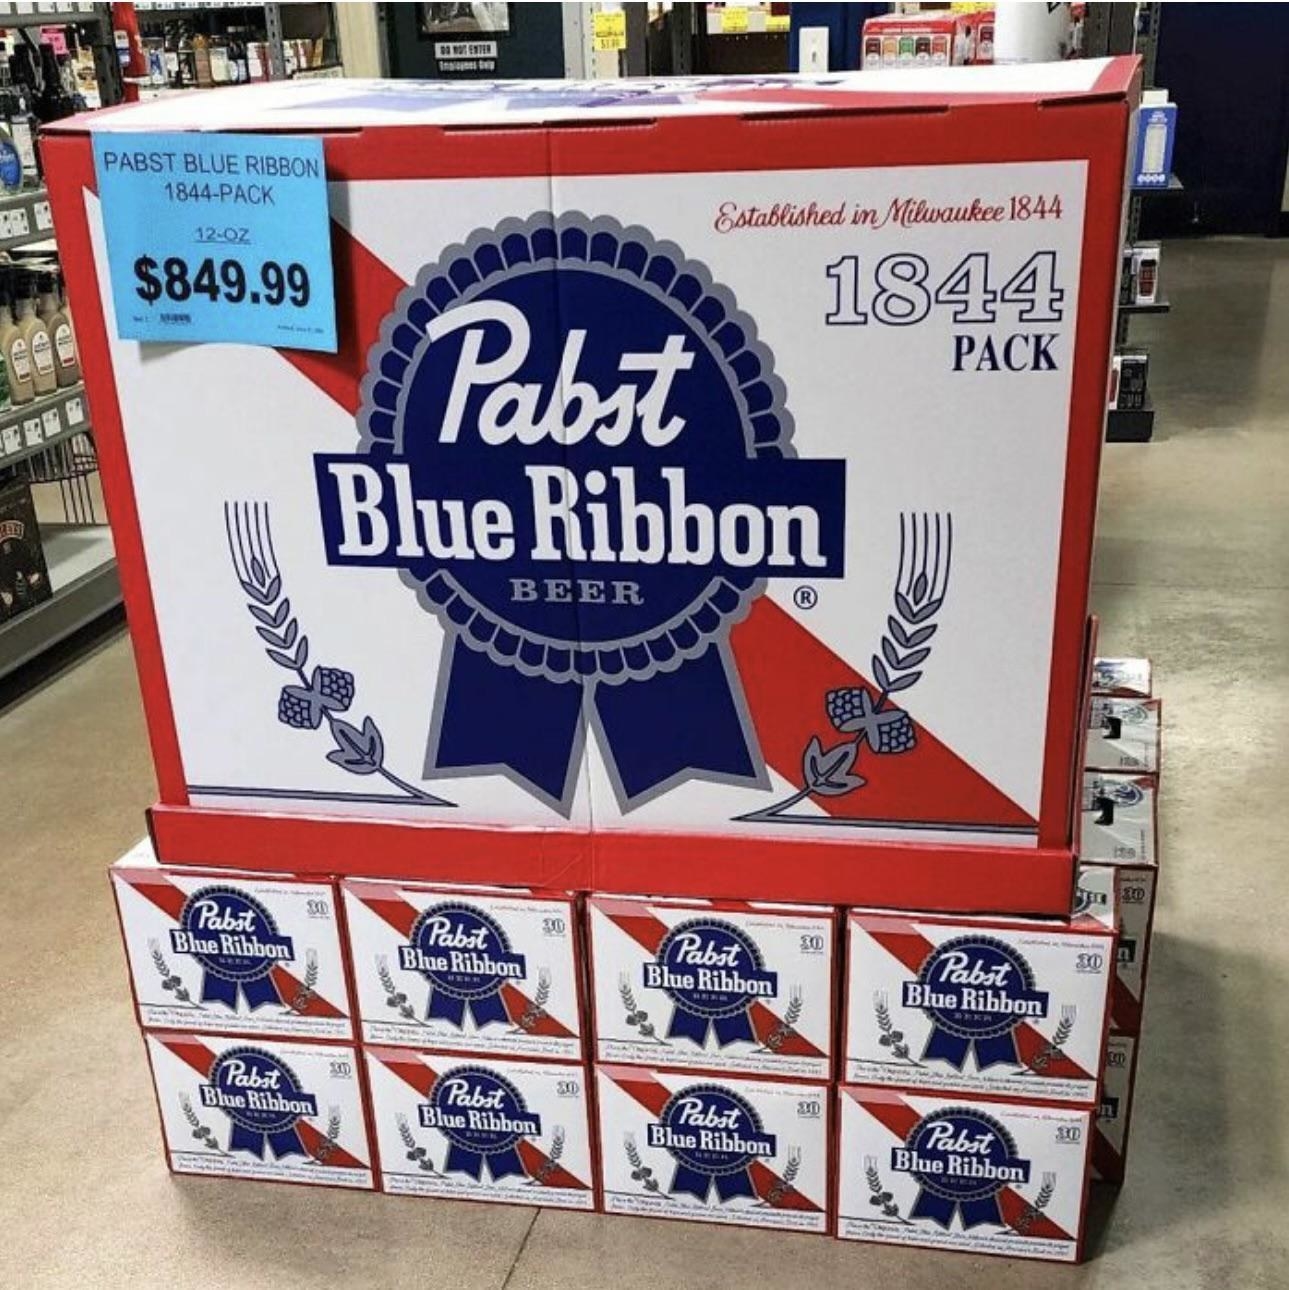 An enormous pack of Pabst Blue Ribbon, selling for $849, on top of much smaller containers in a store display